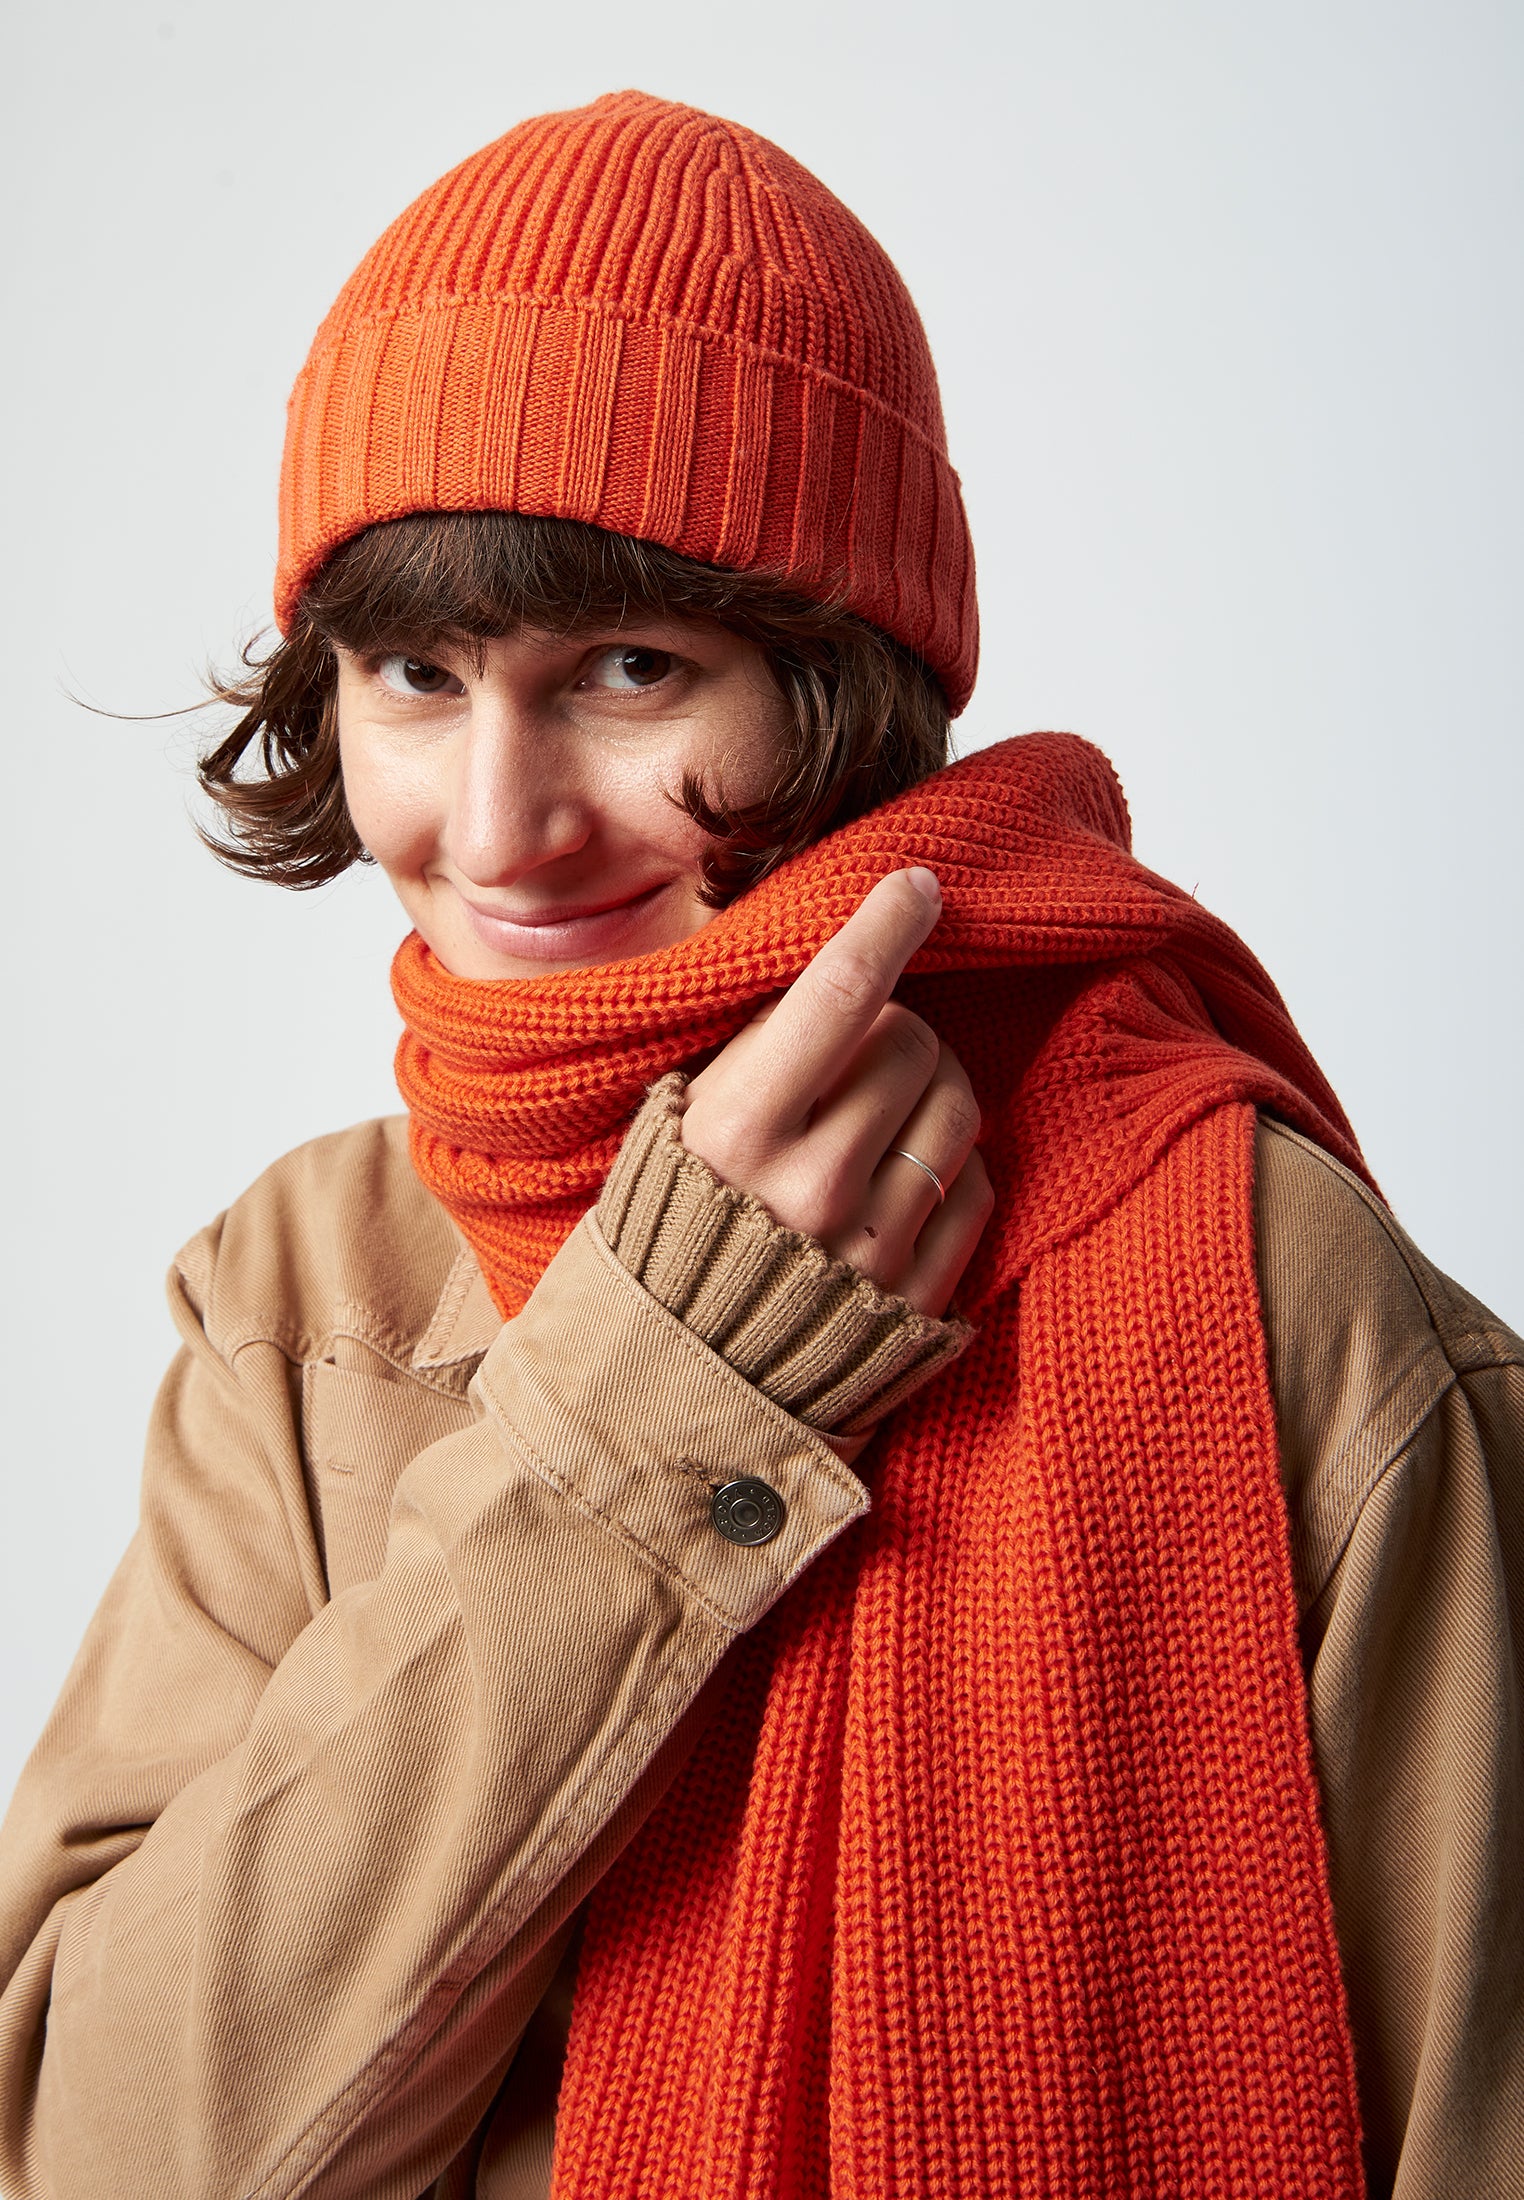 COMBI: Organic cotton knit hat and knit scarf in red